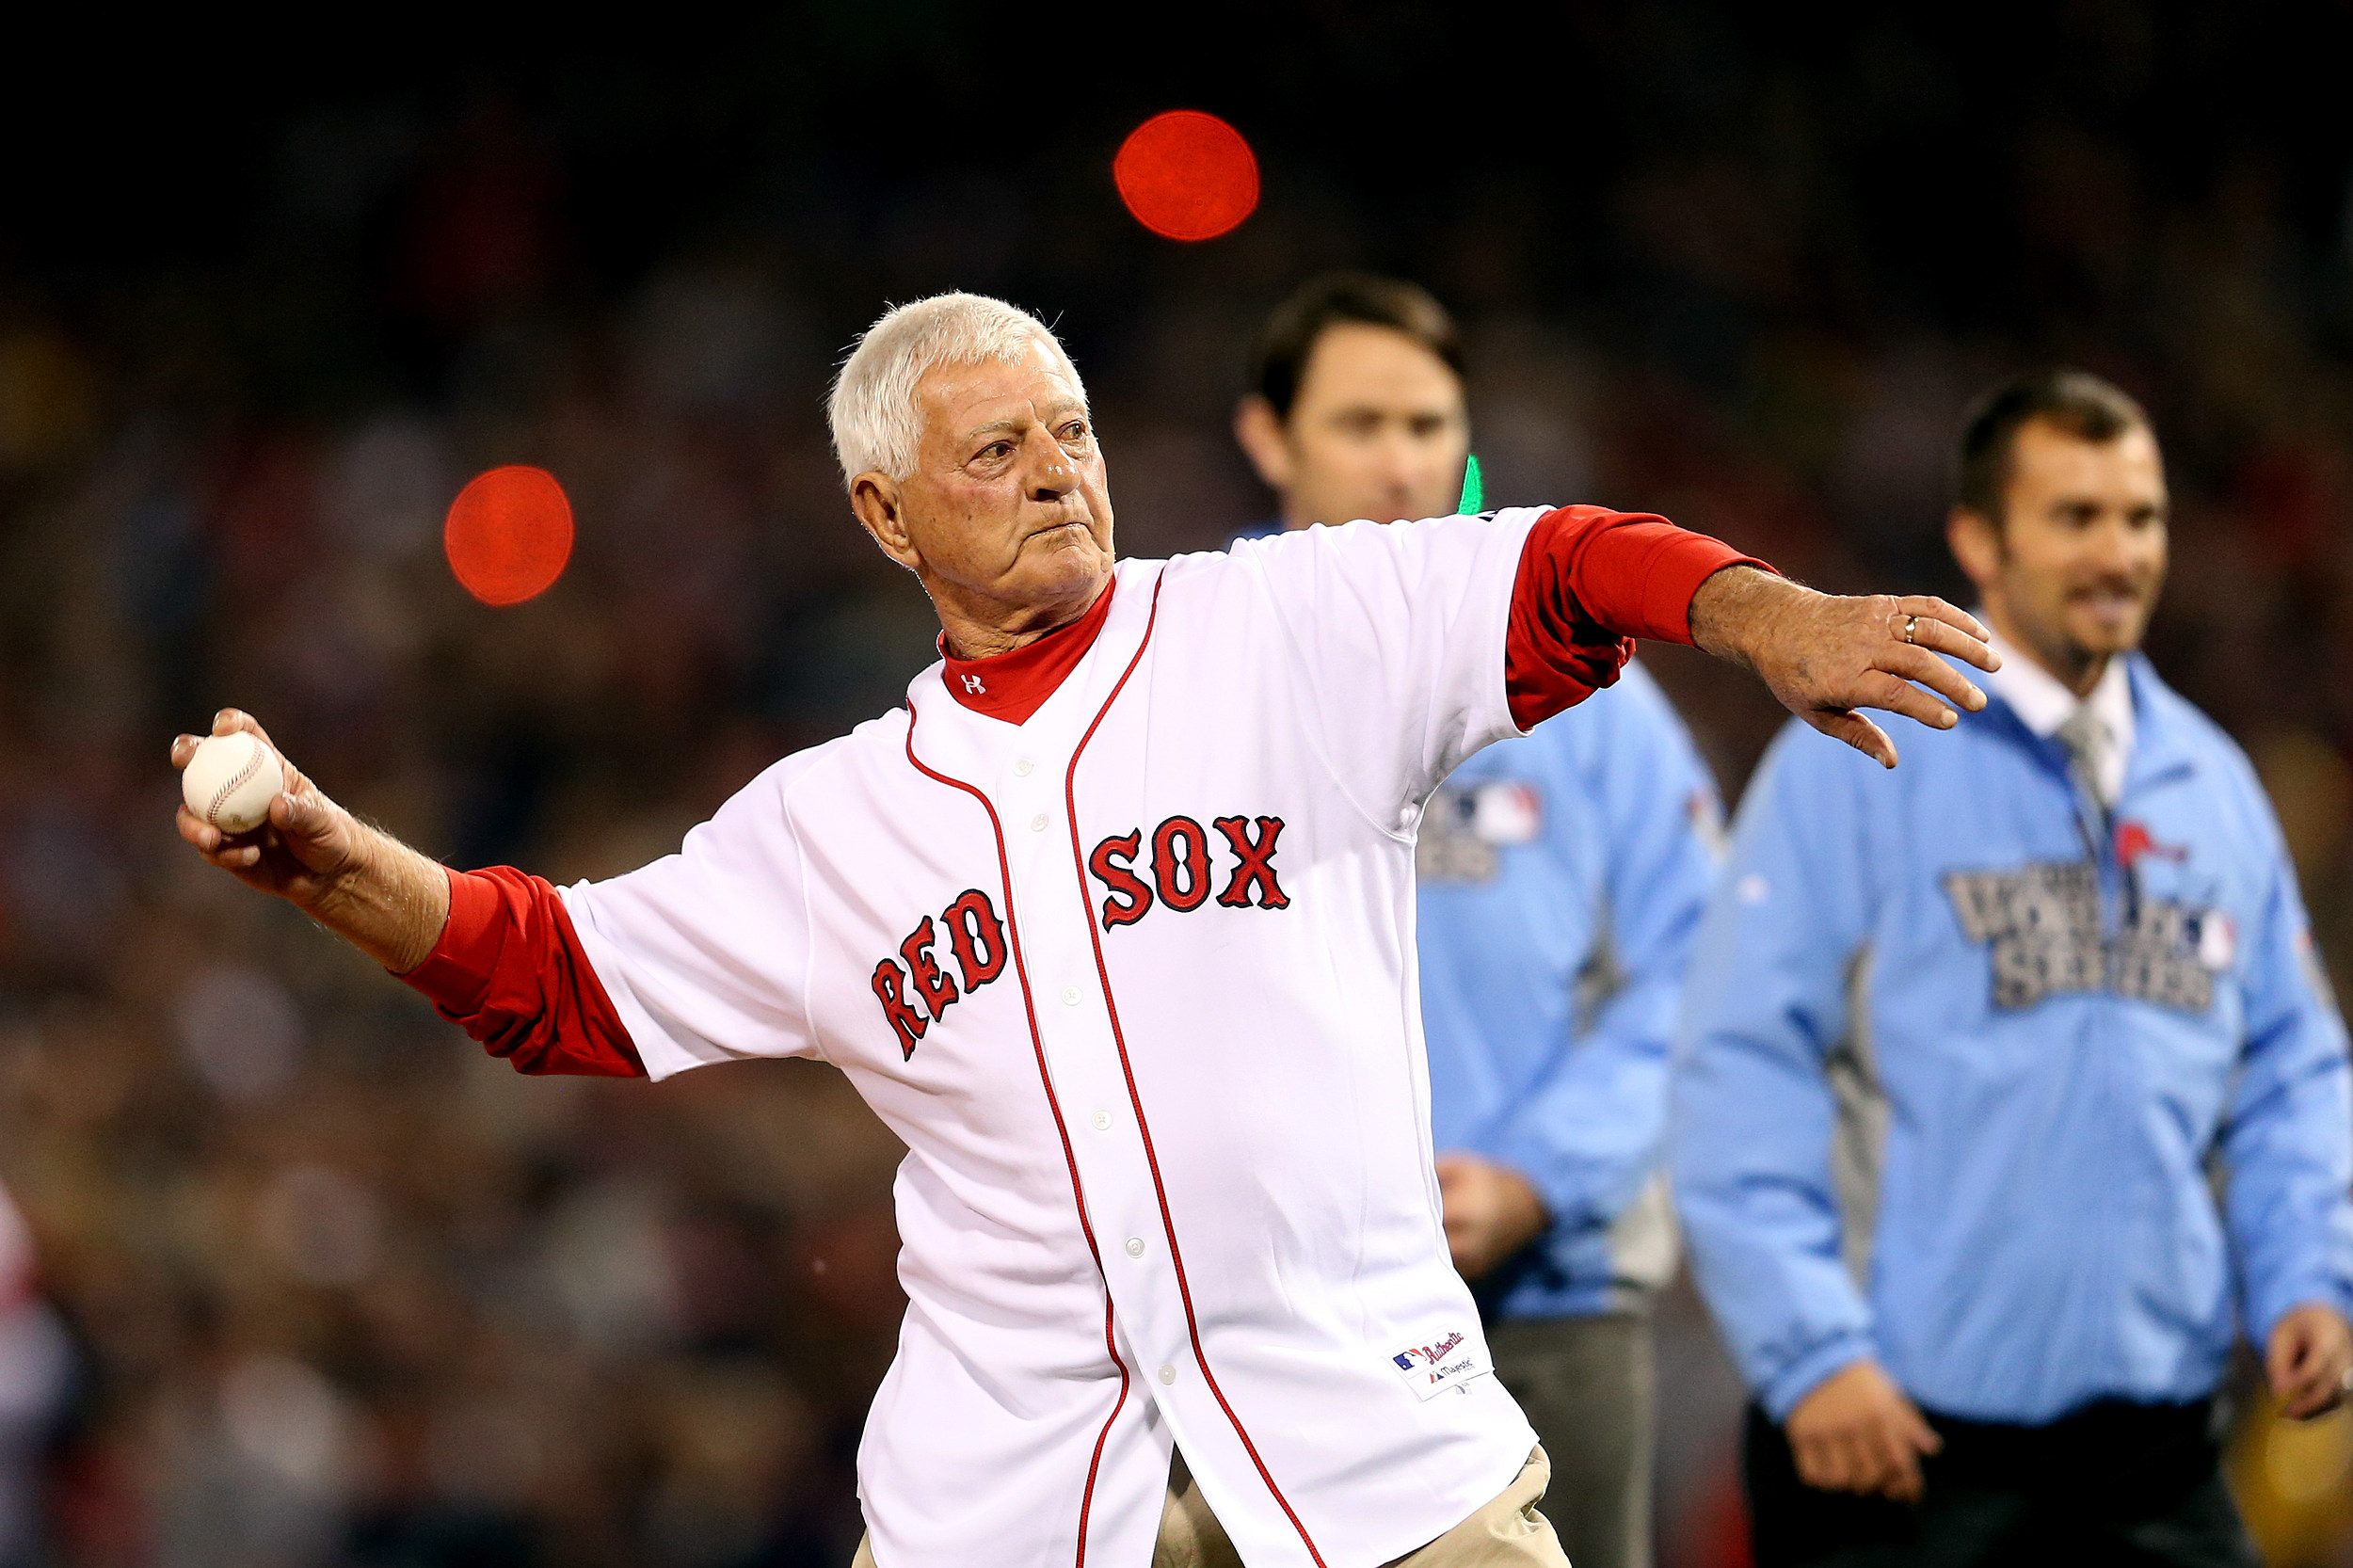 Red Sox player' Carl Yastrzemski throws a first pitch to his 29